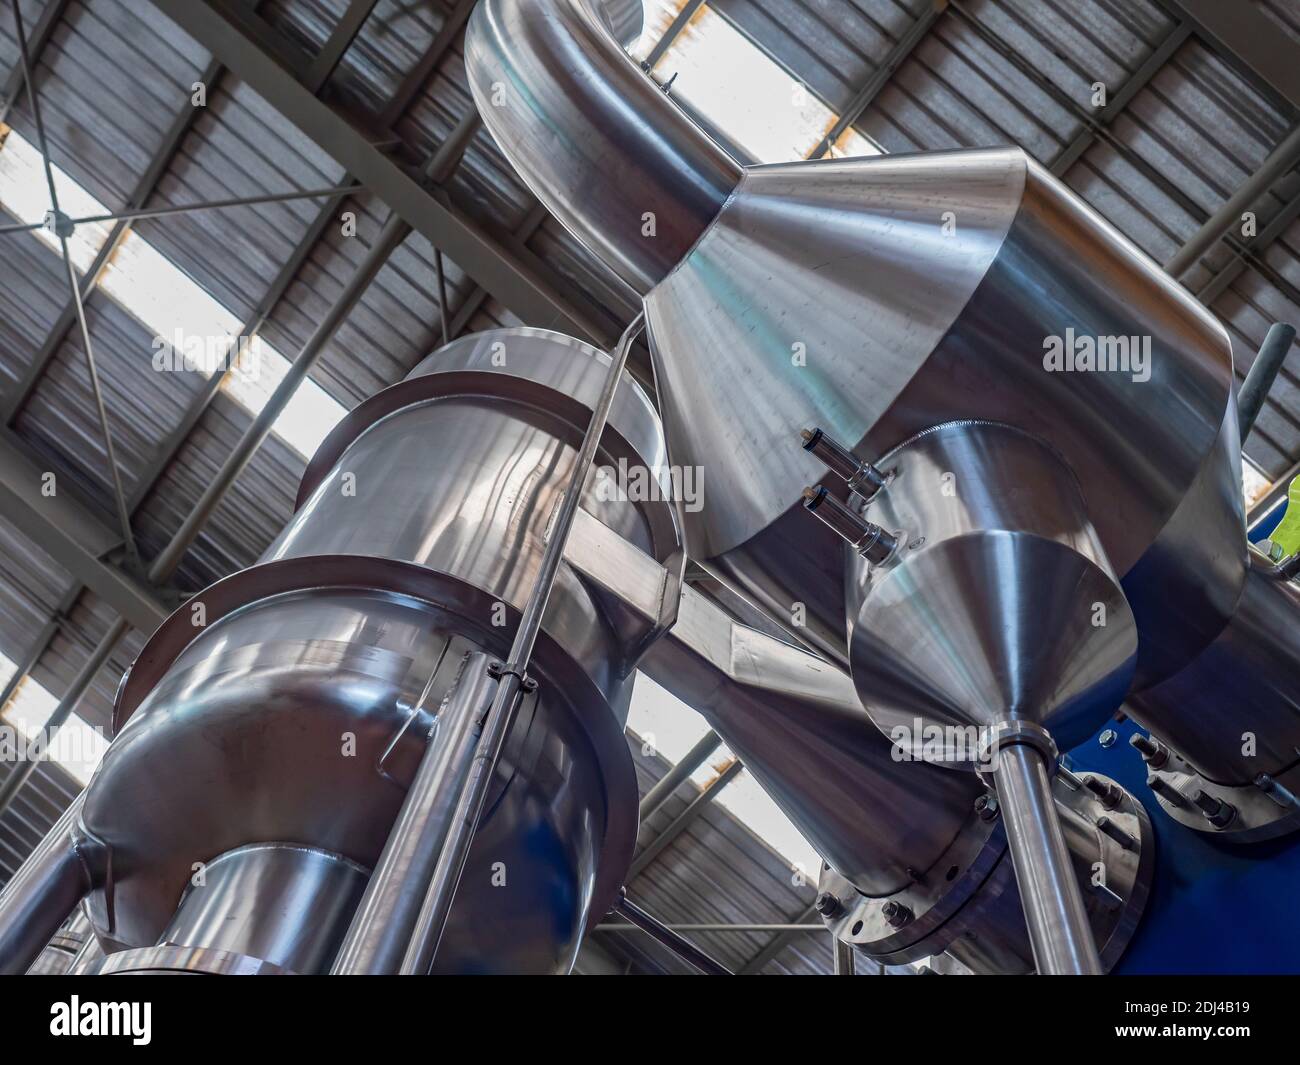 Stainless steel abstract, piping, tanks and ducting for plate heat exchanger. Stock Photo